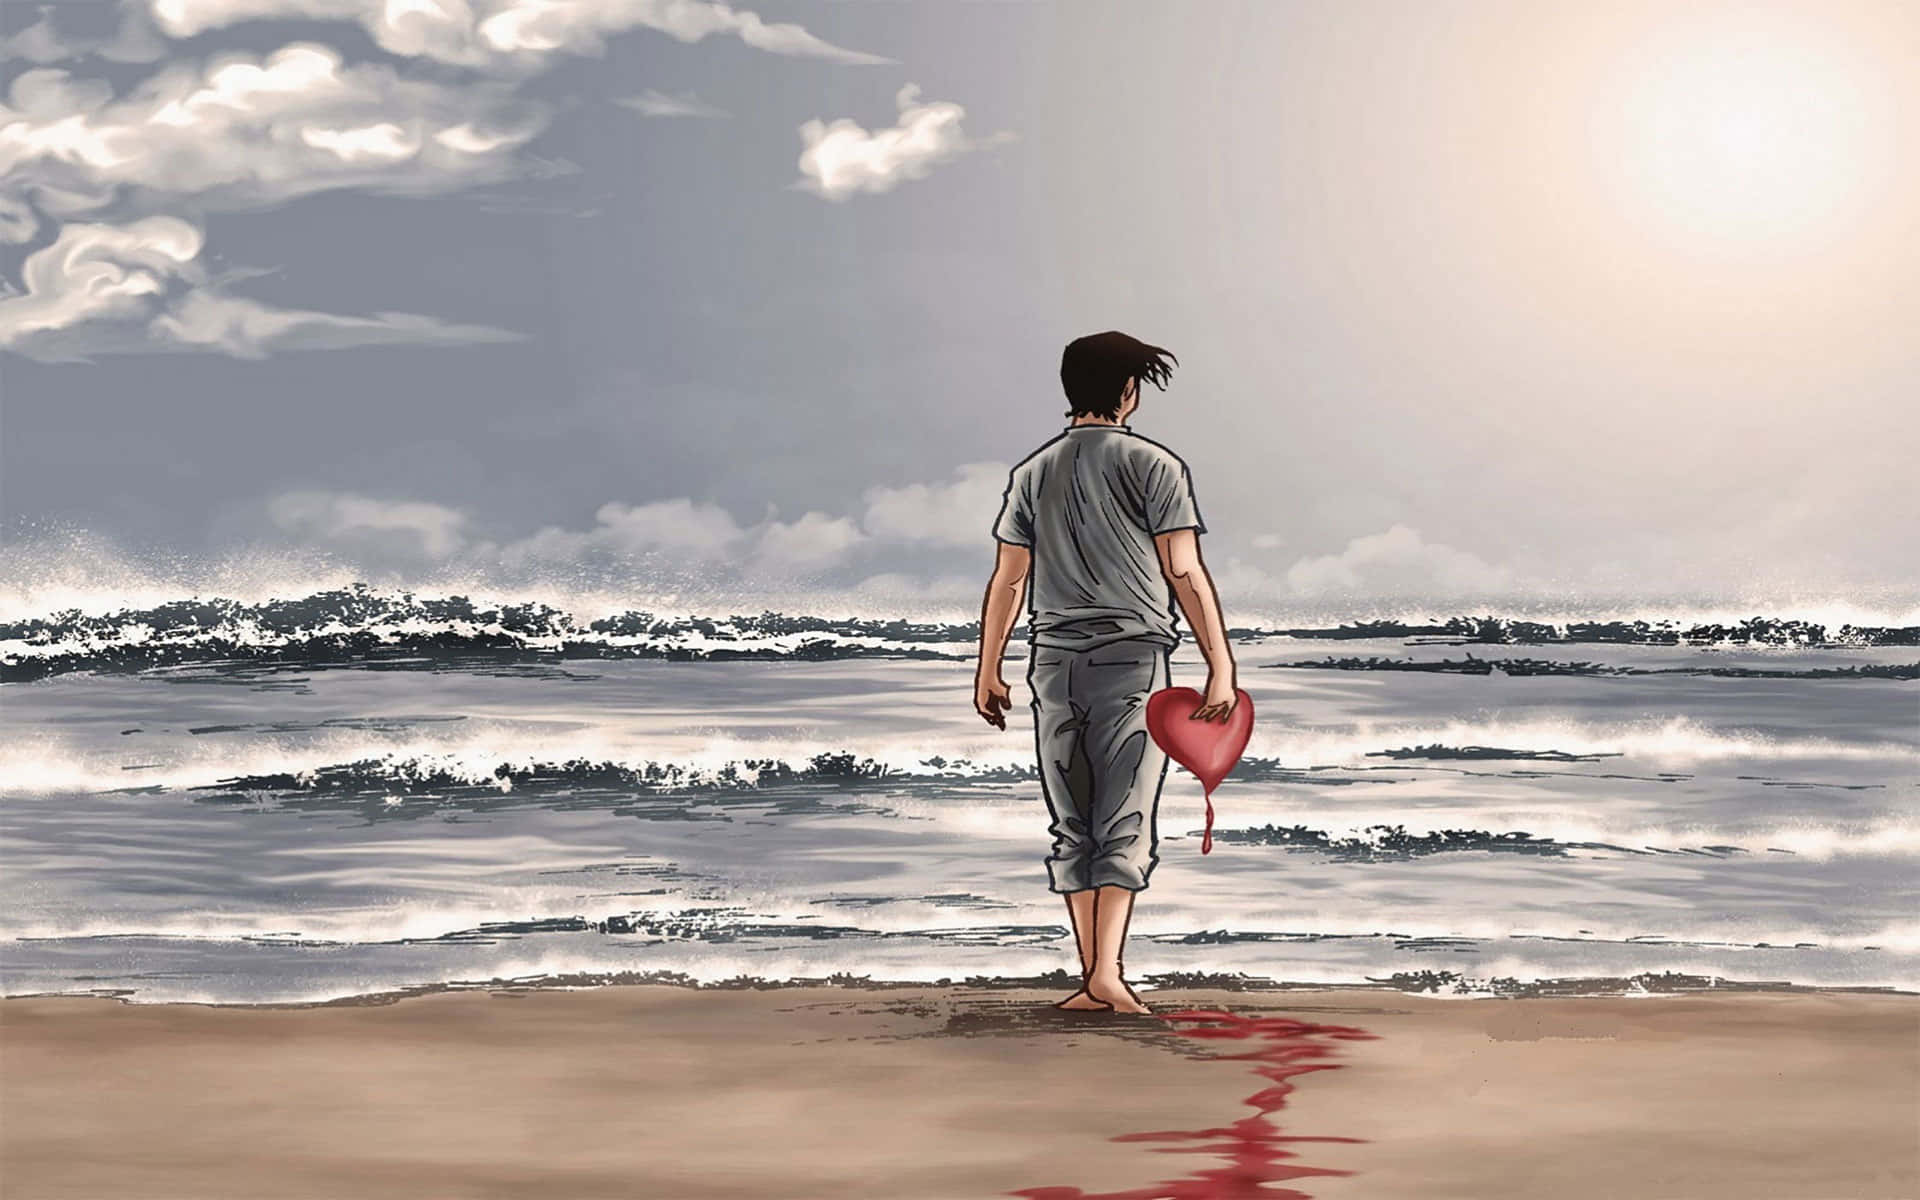 heart touching sad wallpapers